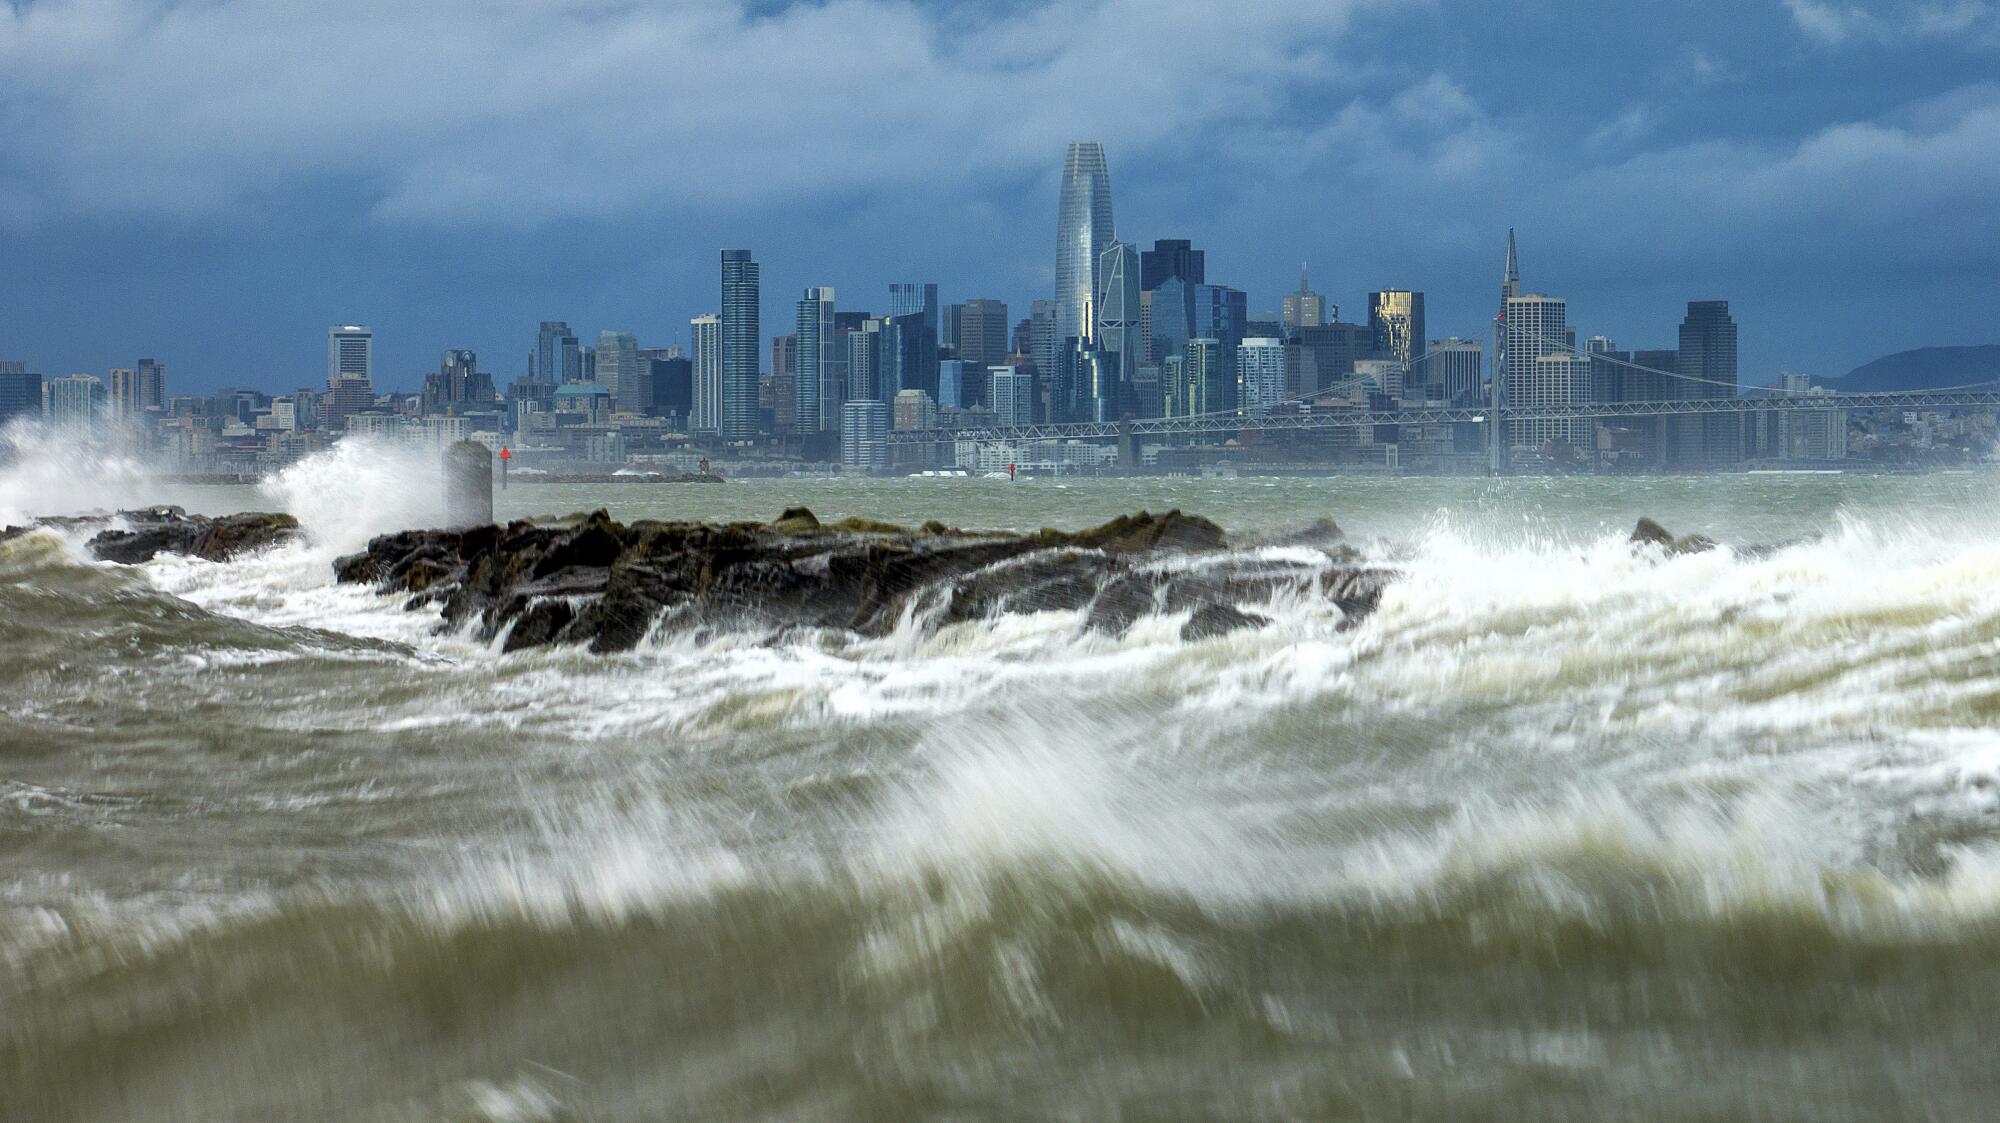 Waves crash over a breakwater in Alameda with the San Francisco skyline in the background.